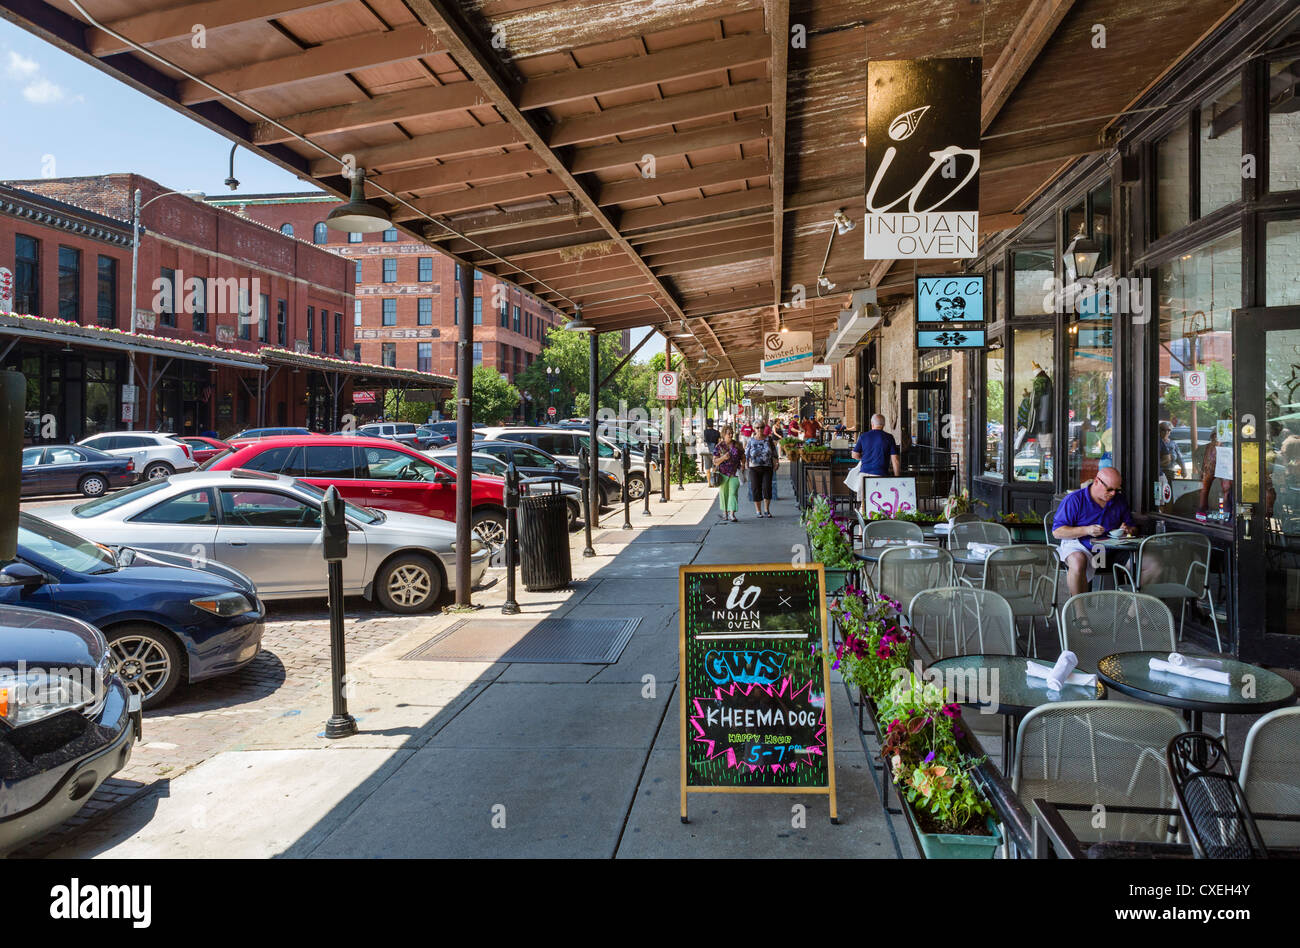 Indian restaurant and shops on Howard Street in the historic Old Market district, Omaha, Nebraska, USA Stock Photo